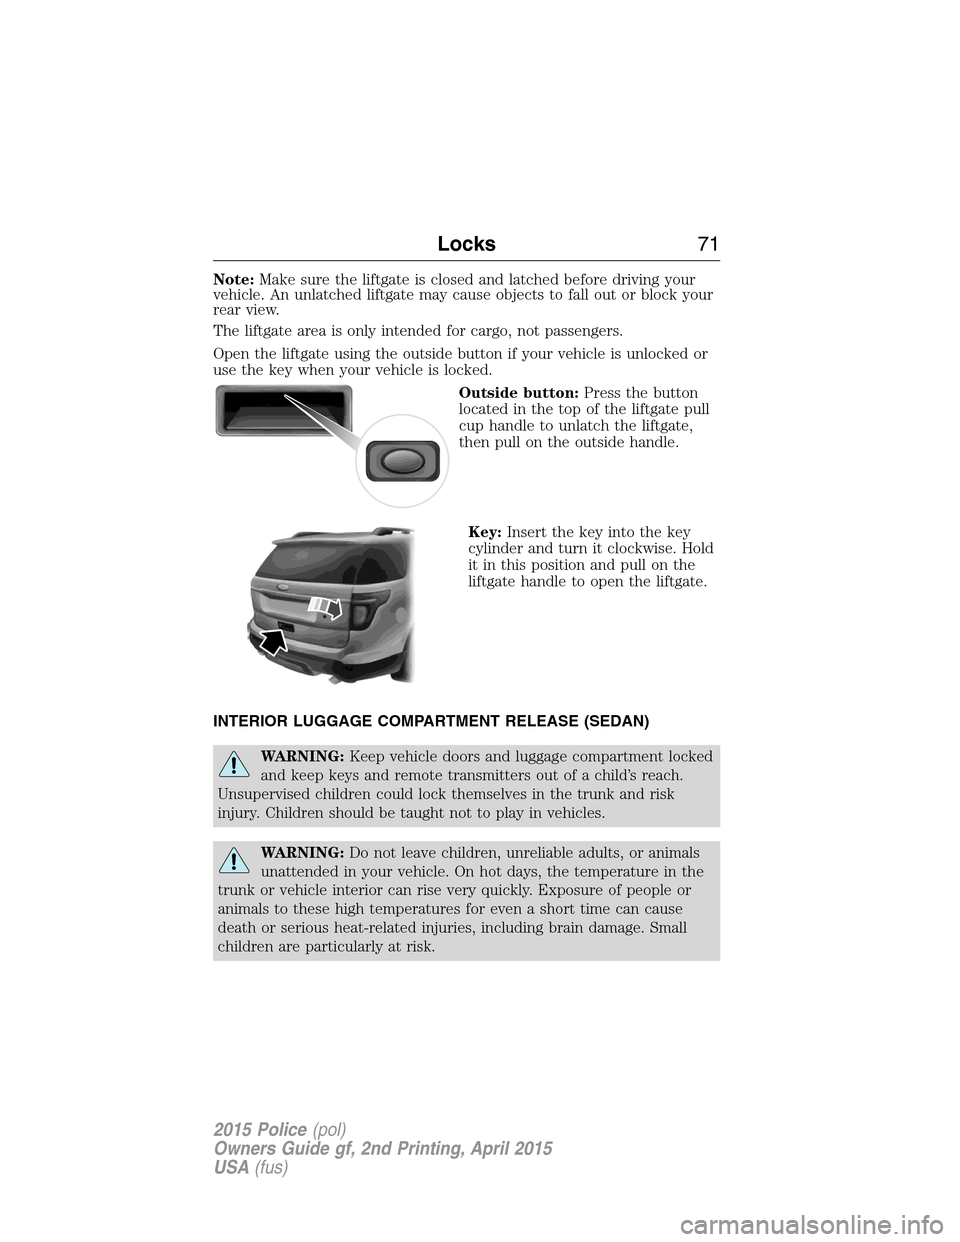 FORD POLICE INTERCEPTOR SEDAN 2015 1.G Owners Manual Note:Make sure the liftgate is closed and latched before driving your
vehicle. An unlatched liftgate may cause objects to fall out or block your
rear view.
The liftgate area is only intended for cargo